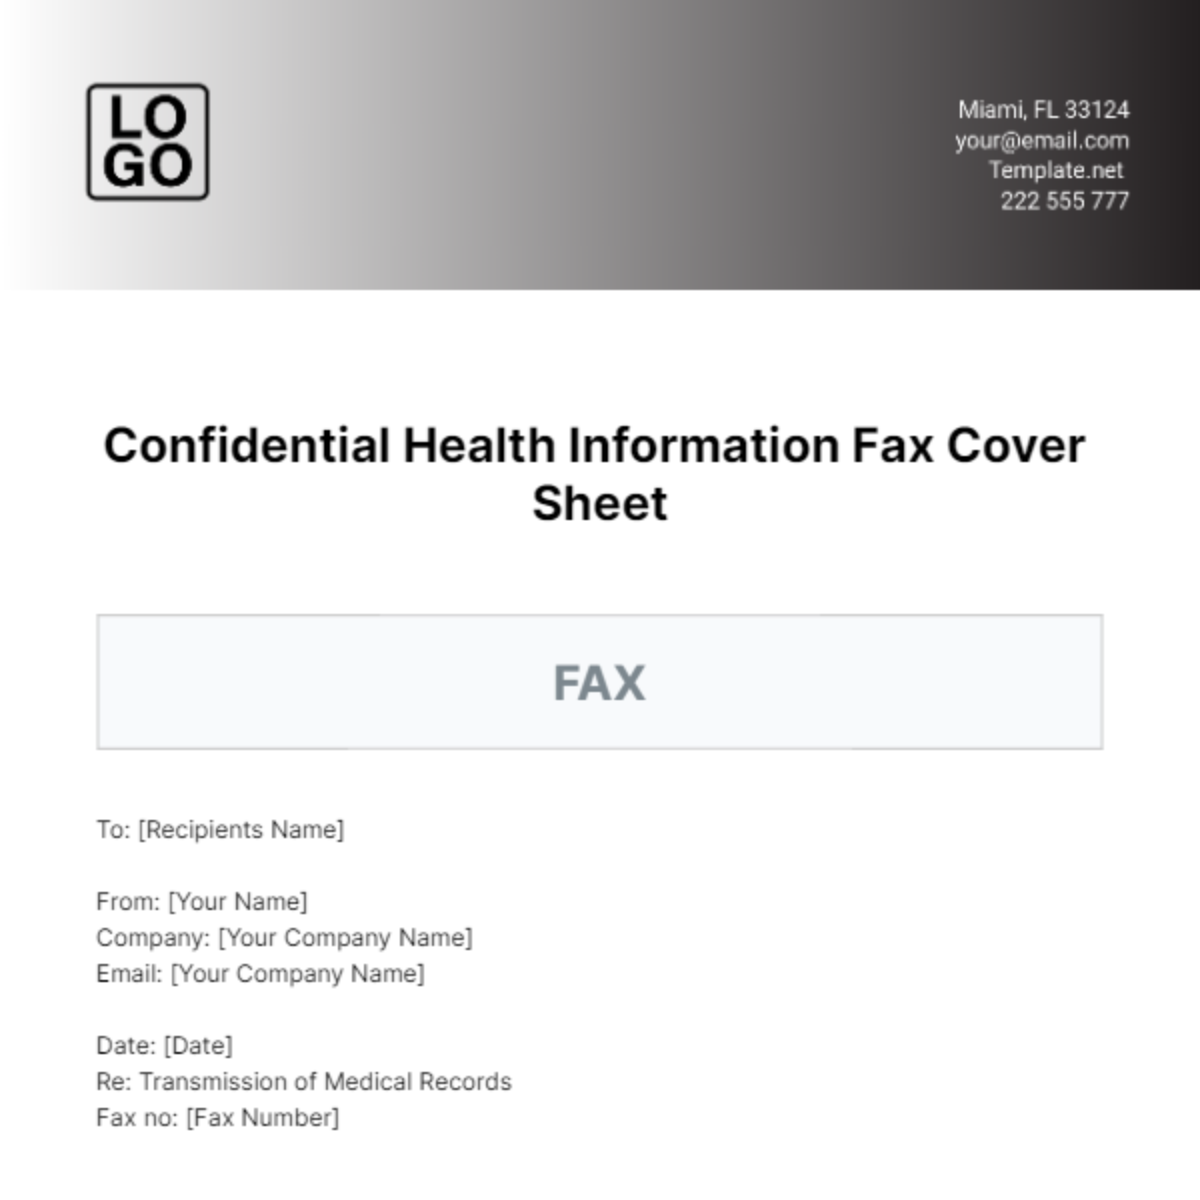 Confidential Health Information Fax Cover Sheet